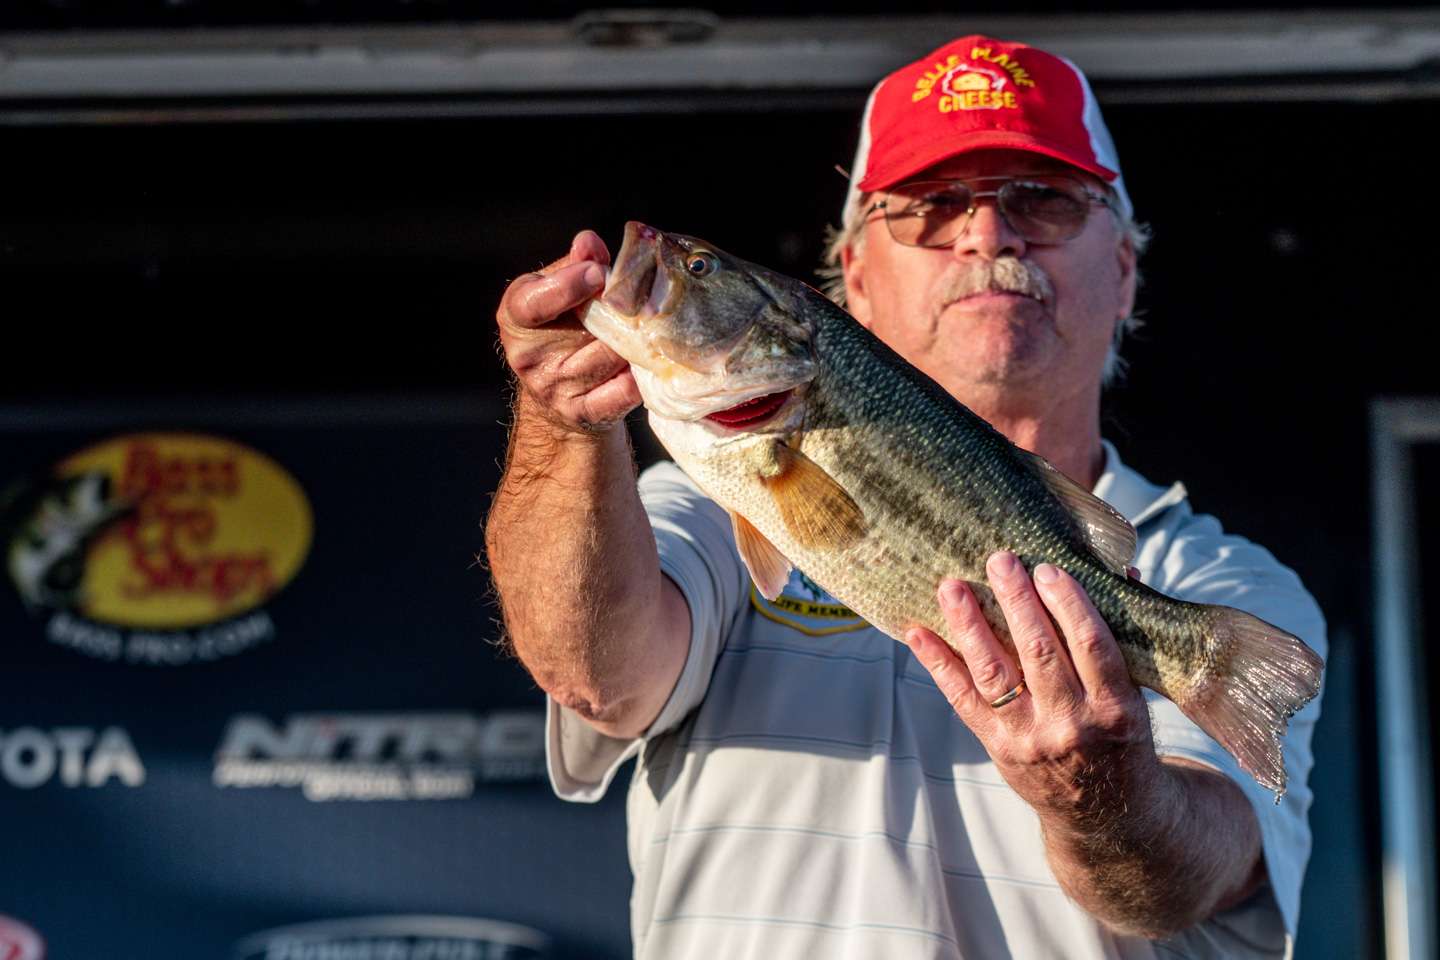 Darrell Hille, 27th place co-angler (8-3)